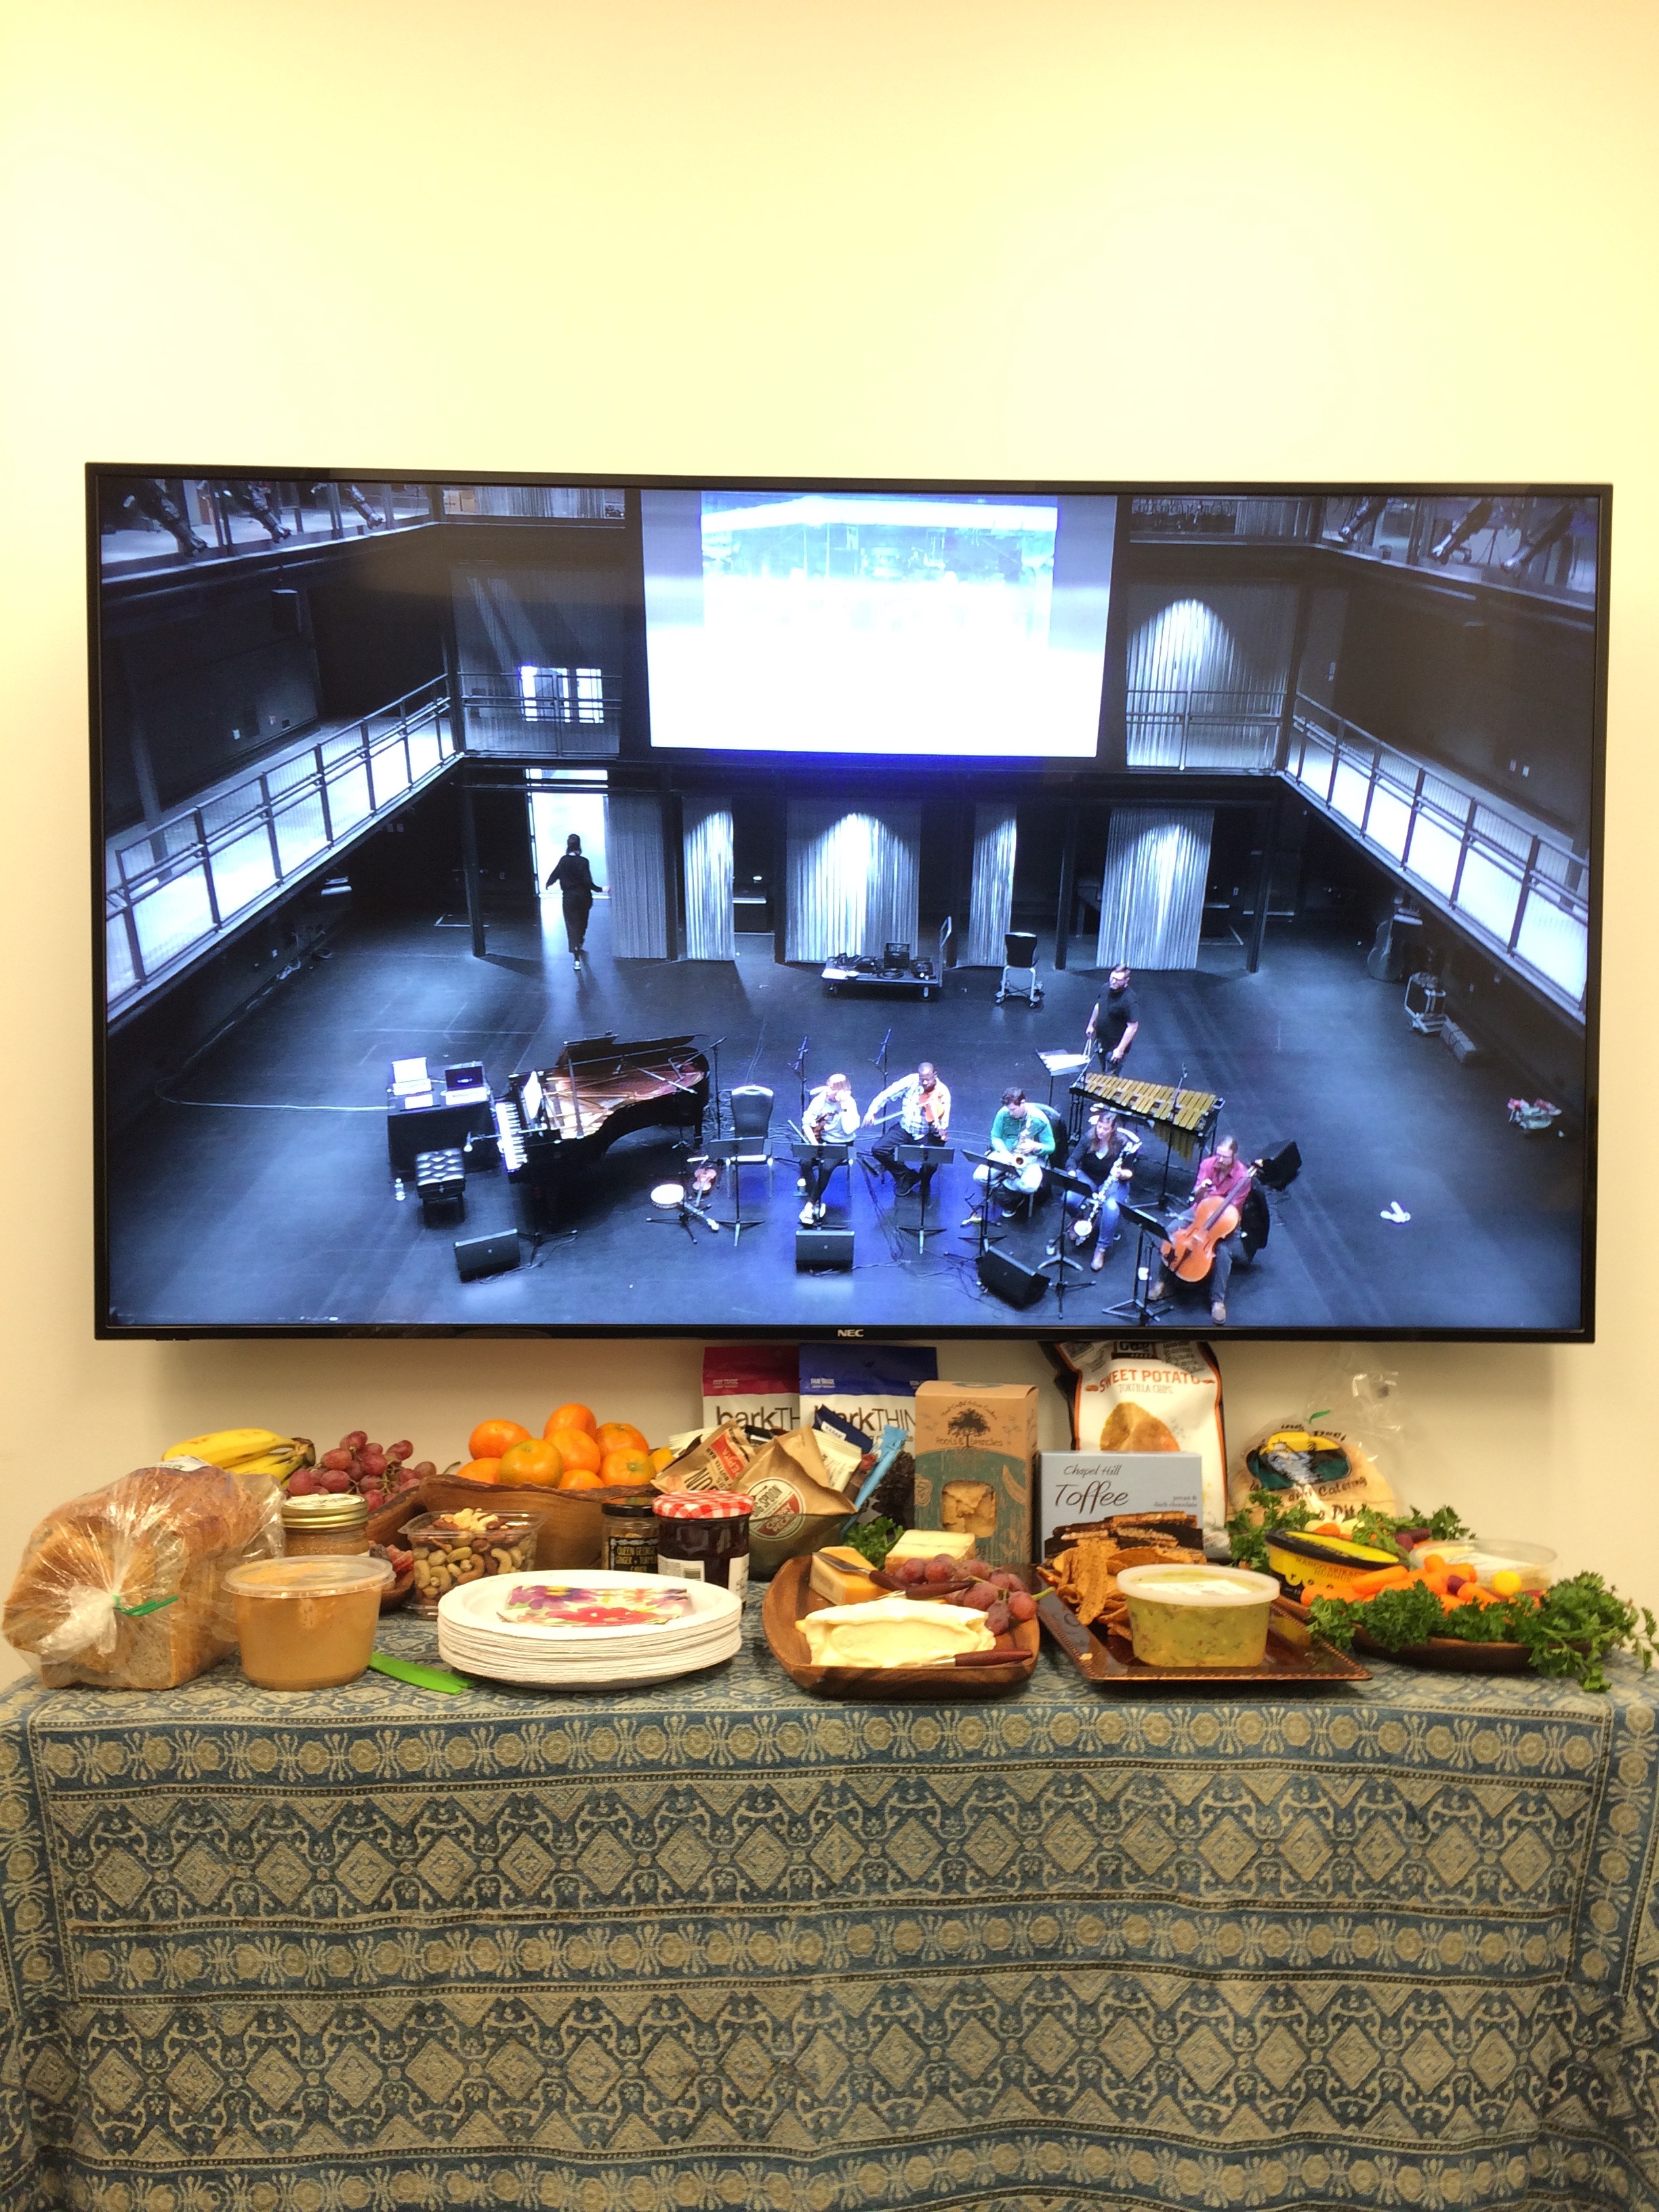  From the Green Room: the hospitality was outstanding, and we could monitor the performance from the live video feed. 